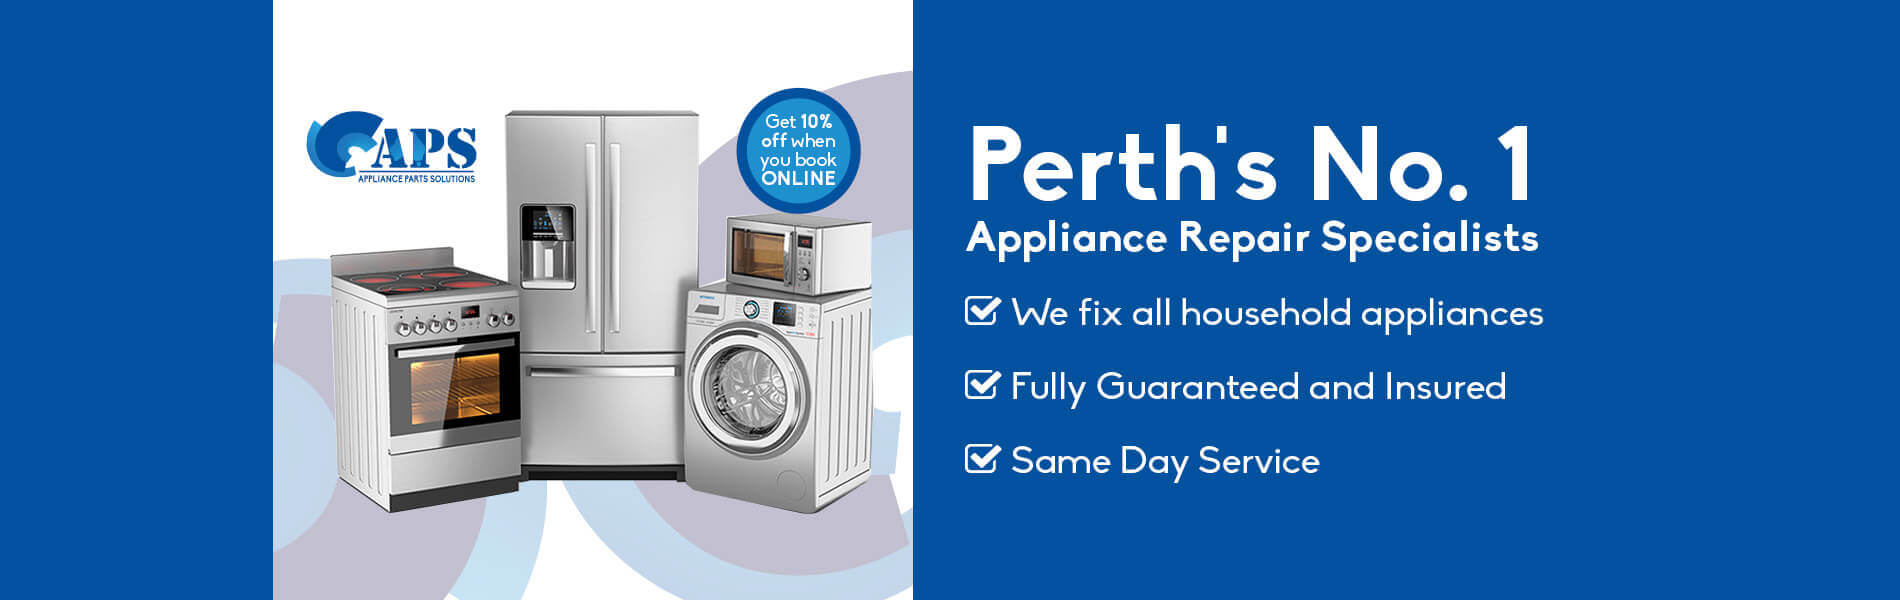 Appliance Repair Specialists | Perth